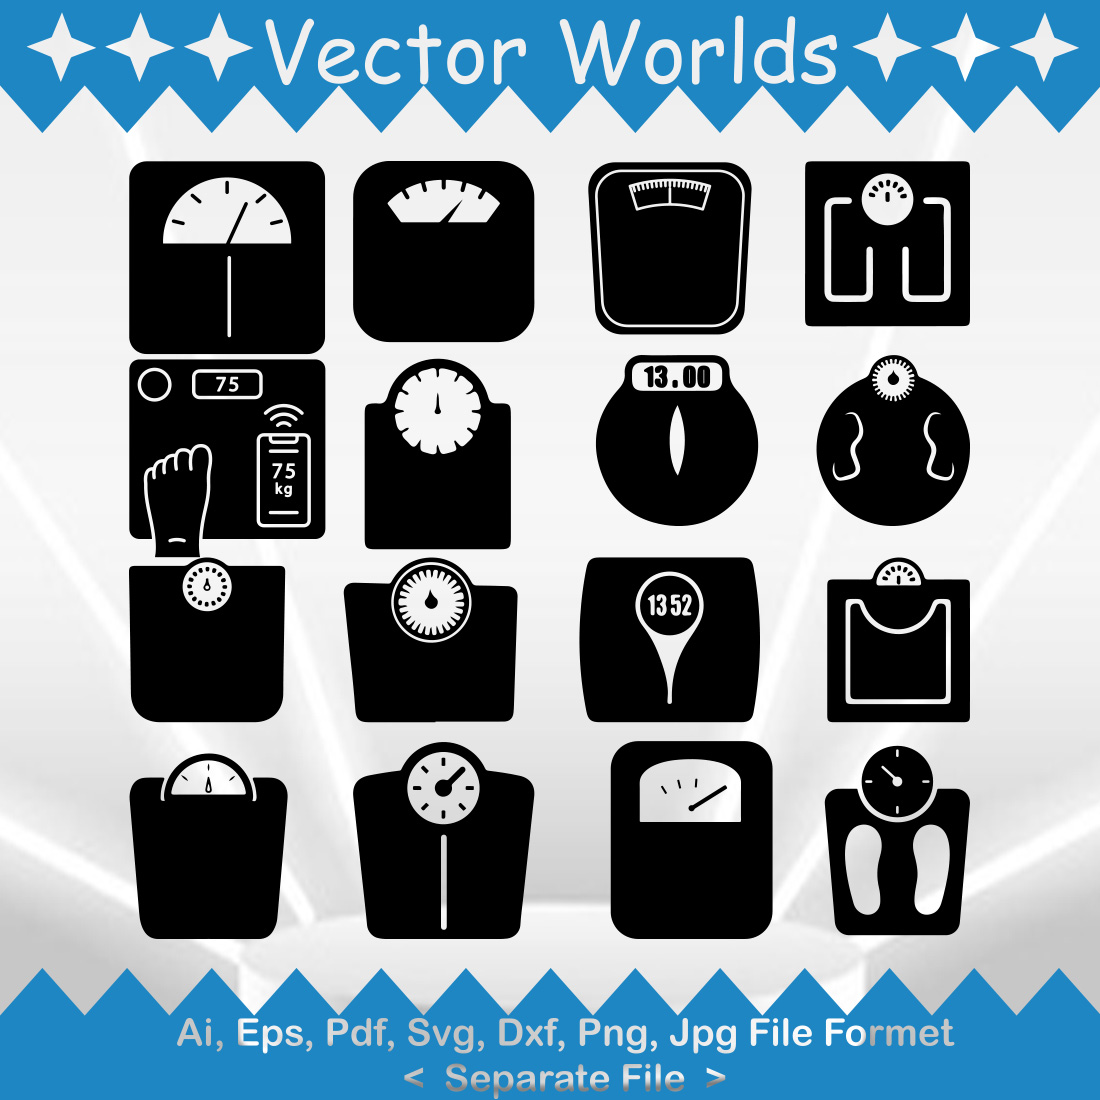 Body Weighing Scale SVG Vector Design cover image.